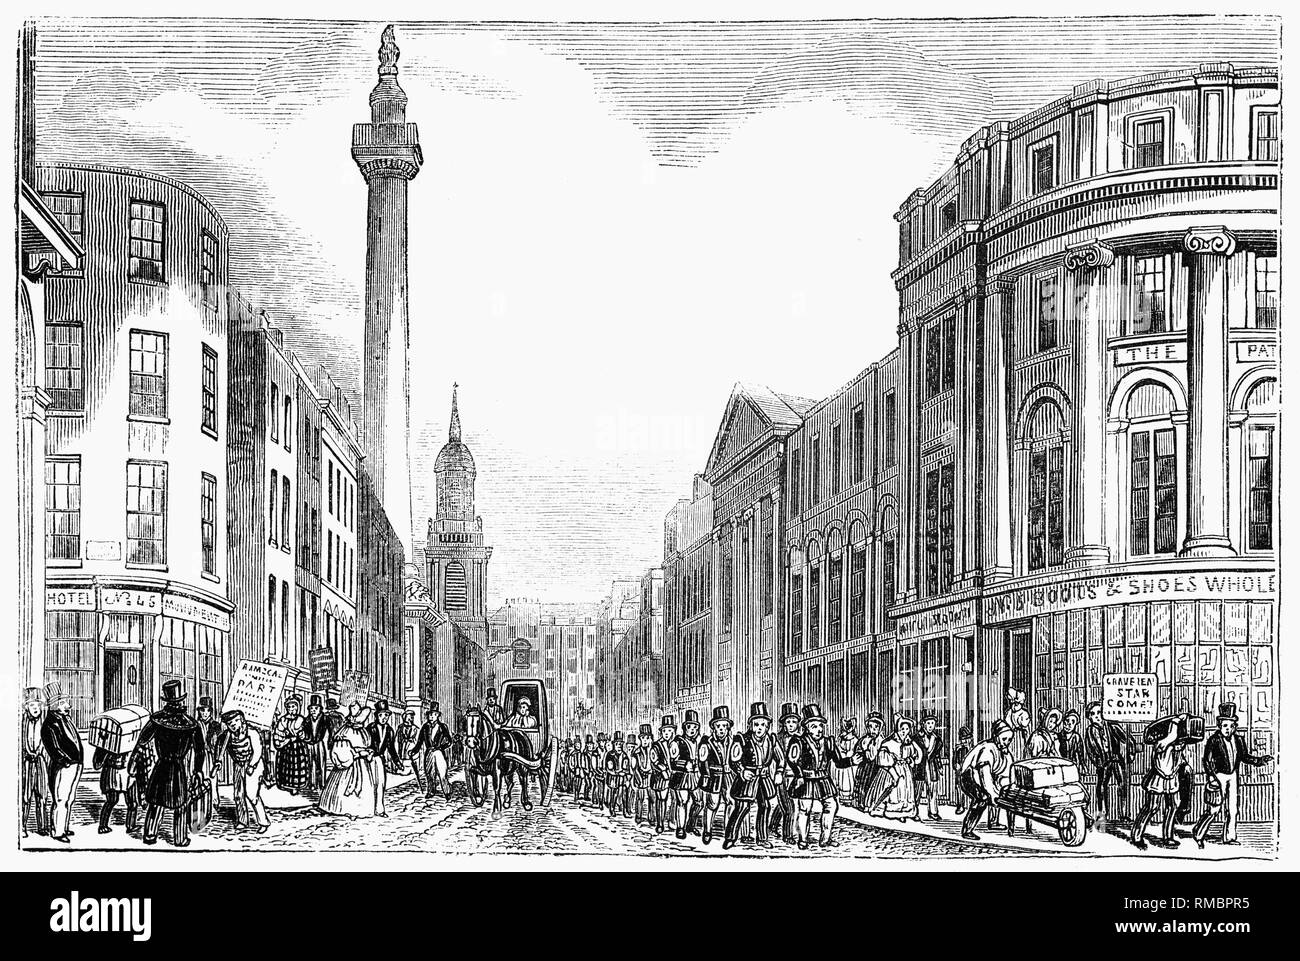 Members of the 19th century London Fire Brigade march on Old Fish Street Hill below the Monument to the Great Fire, a Doric column in London, United Kingdom, situated near the northern end of London Bridge. Commemorating the Great Fire of London, it stands at the junction of Monument Street and Fish Street Hill, 202 feet just west of the spot in Pudding Lane where the Great Fire started on 2 September 1666. Constructed between 1671 and 1677, it was built on the site of St. Margaret's, Fish Street, the first church to be destroyed by the Great Fire. Stock Photo